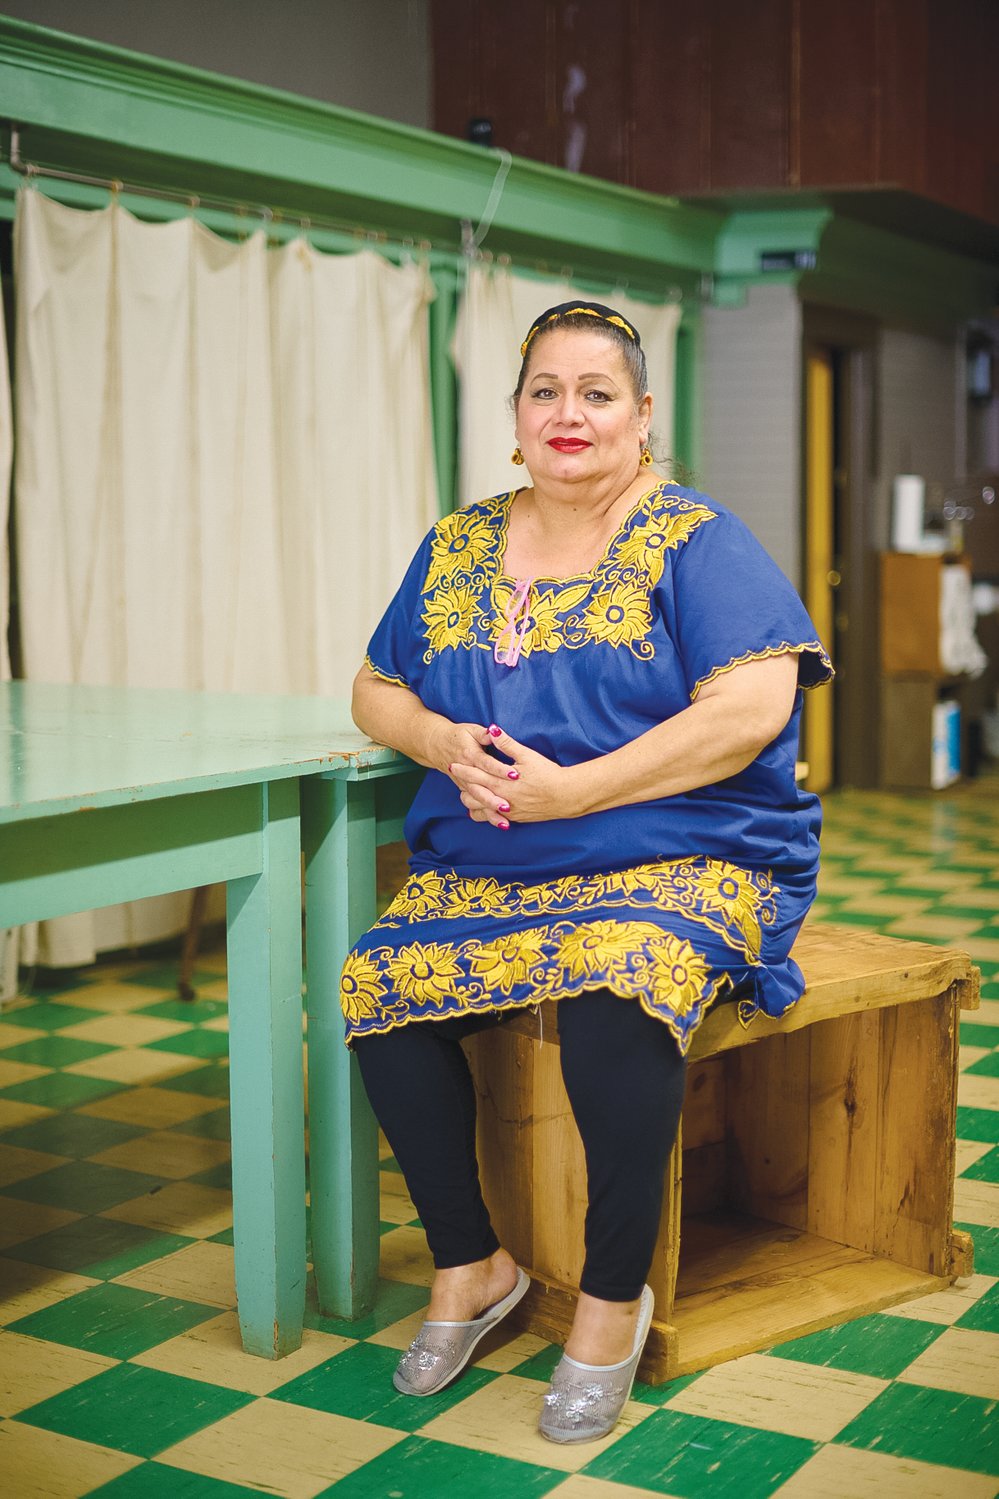 The Hispanic Liaison's Elena González, 62, sits inside The Alliance in downtown Siler City. She goes there most Wednesday mornings for a few hours to study English with her Chatham Literacy tutor, Patty Poe.